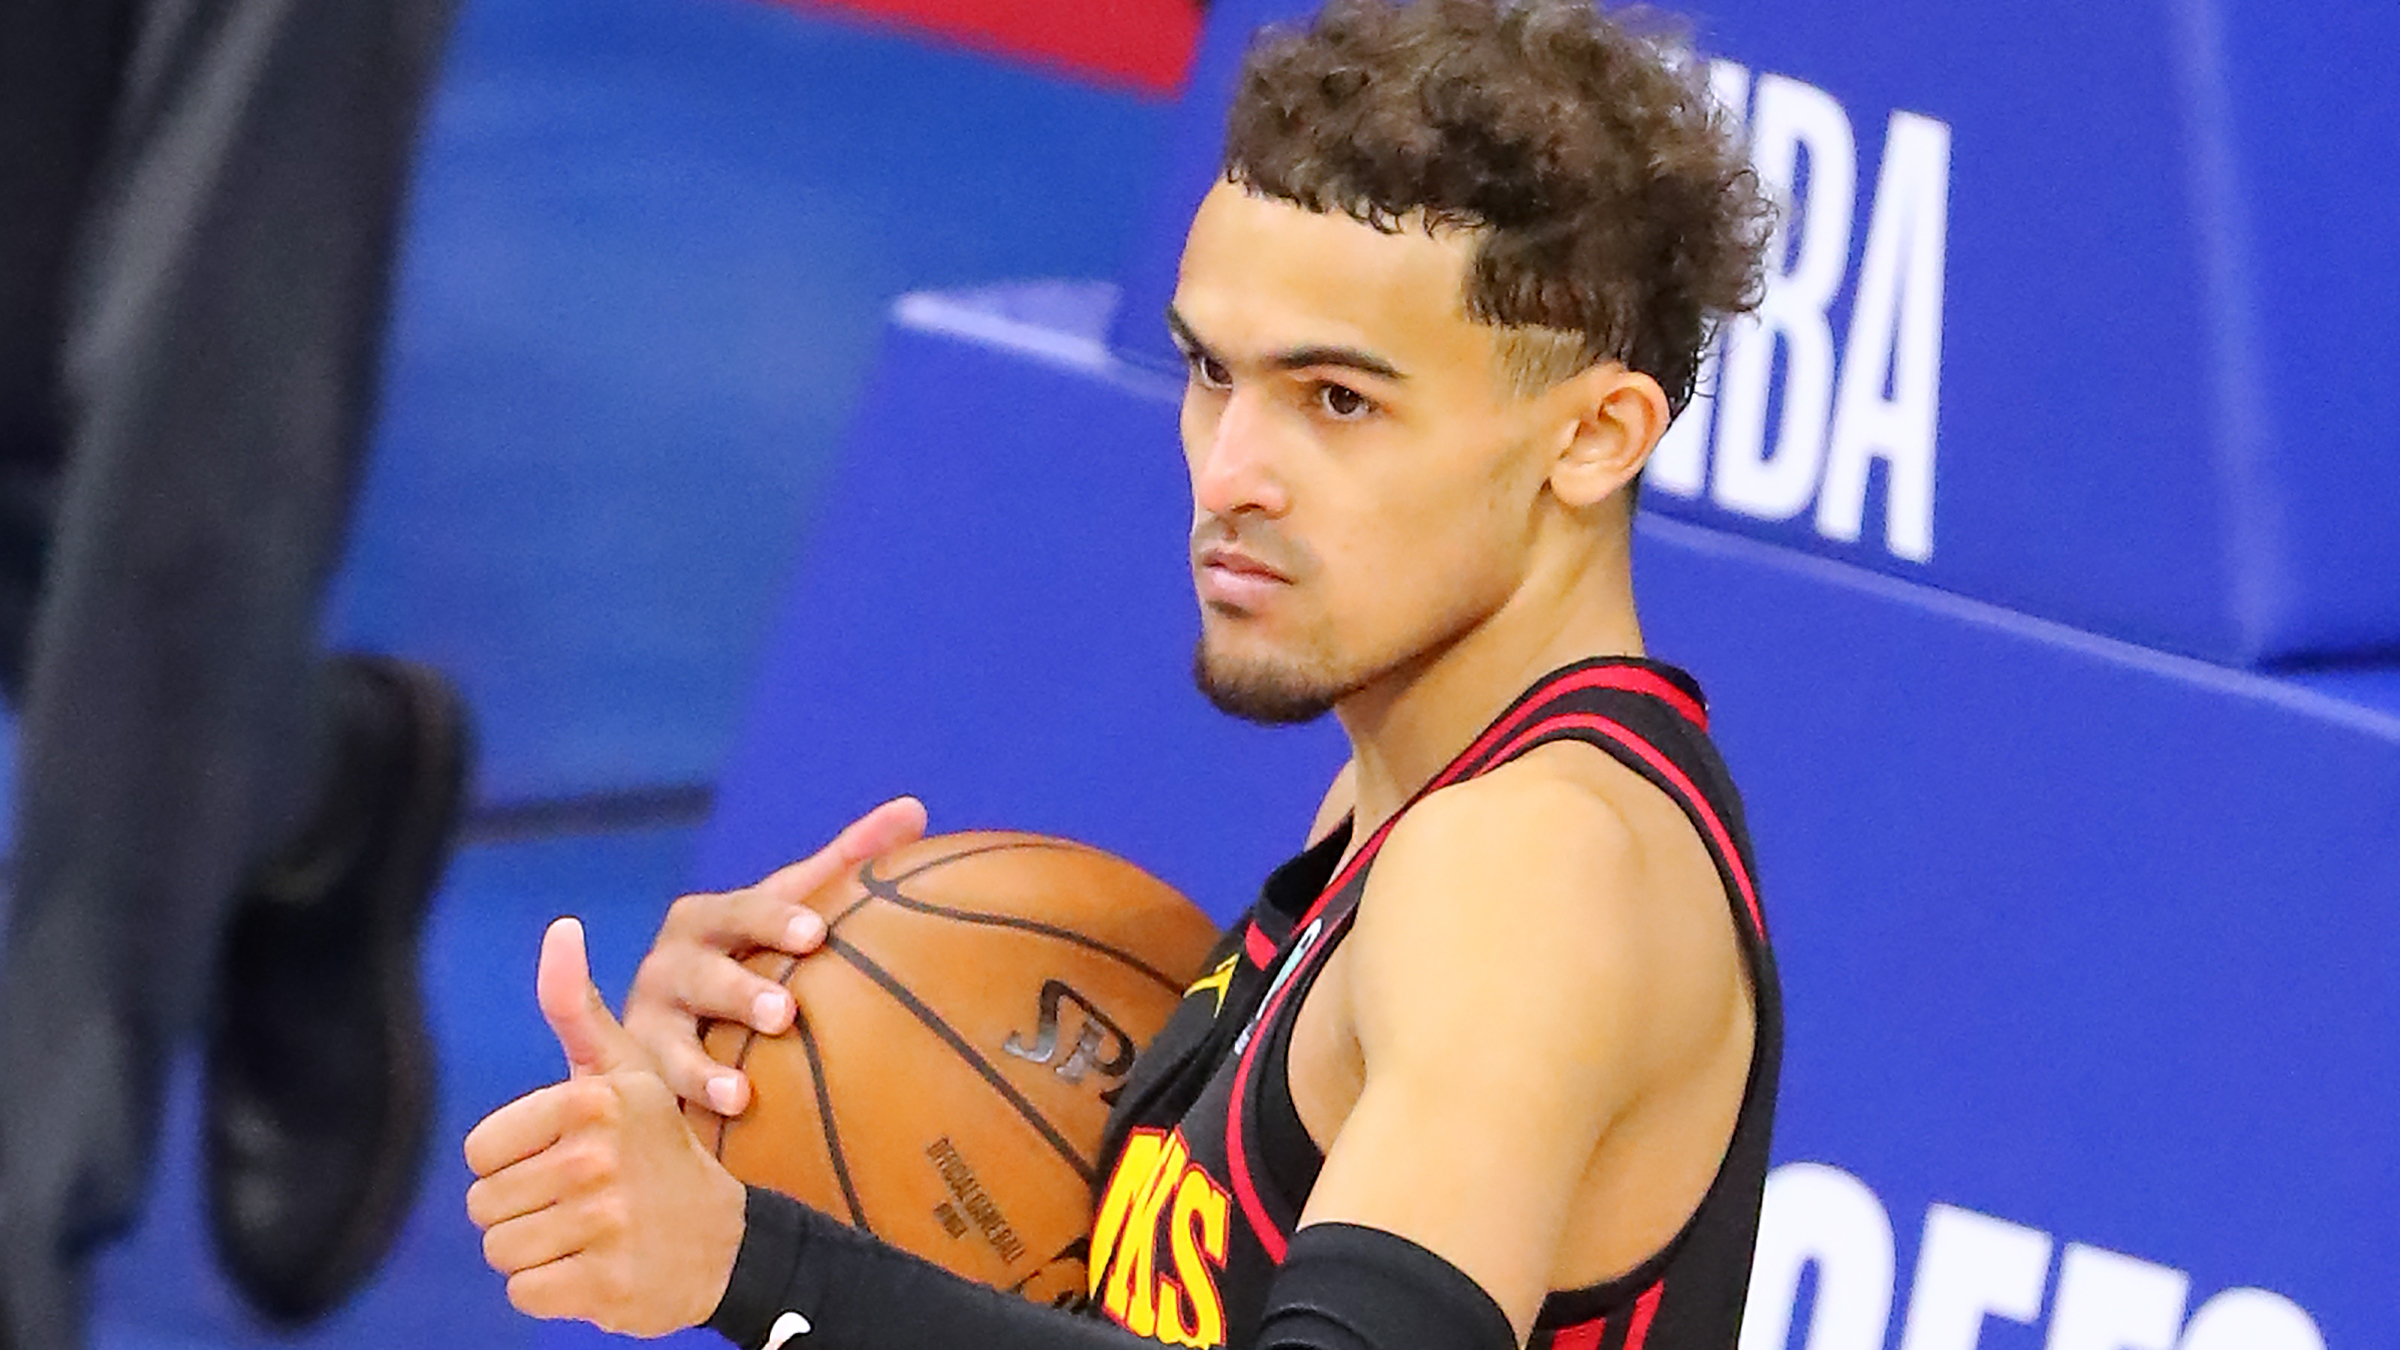 Atlanta Hawks: Trae Young showed us his superstar potential in Game 4